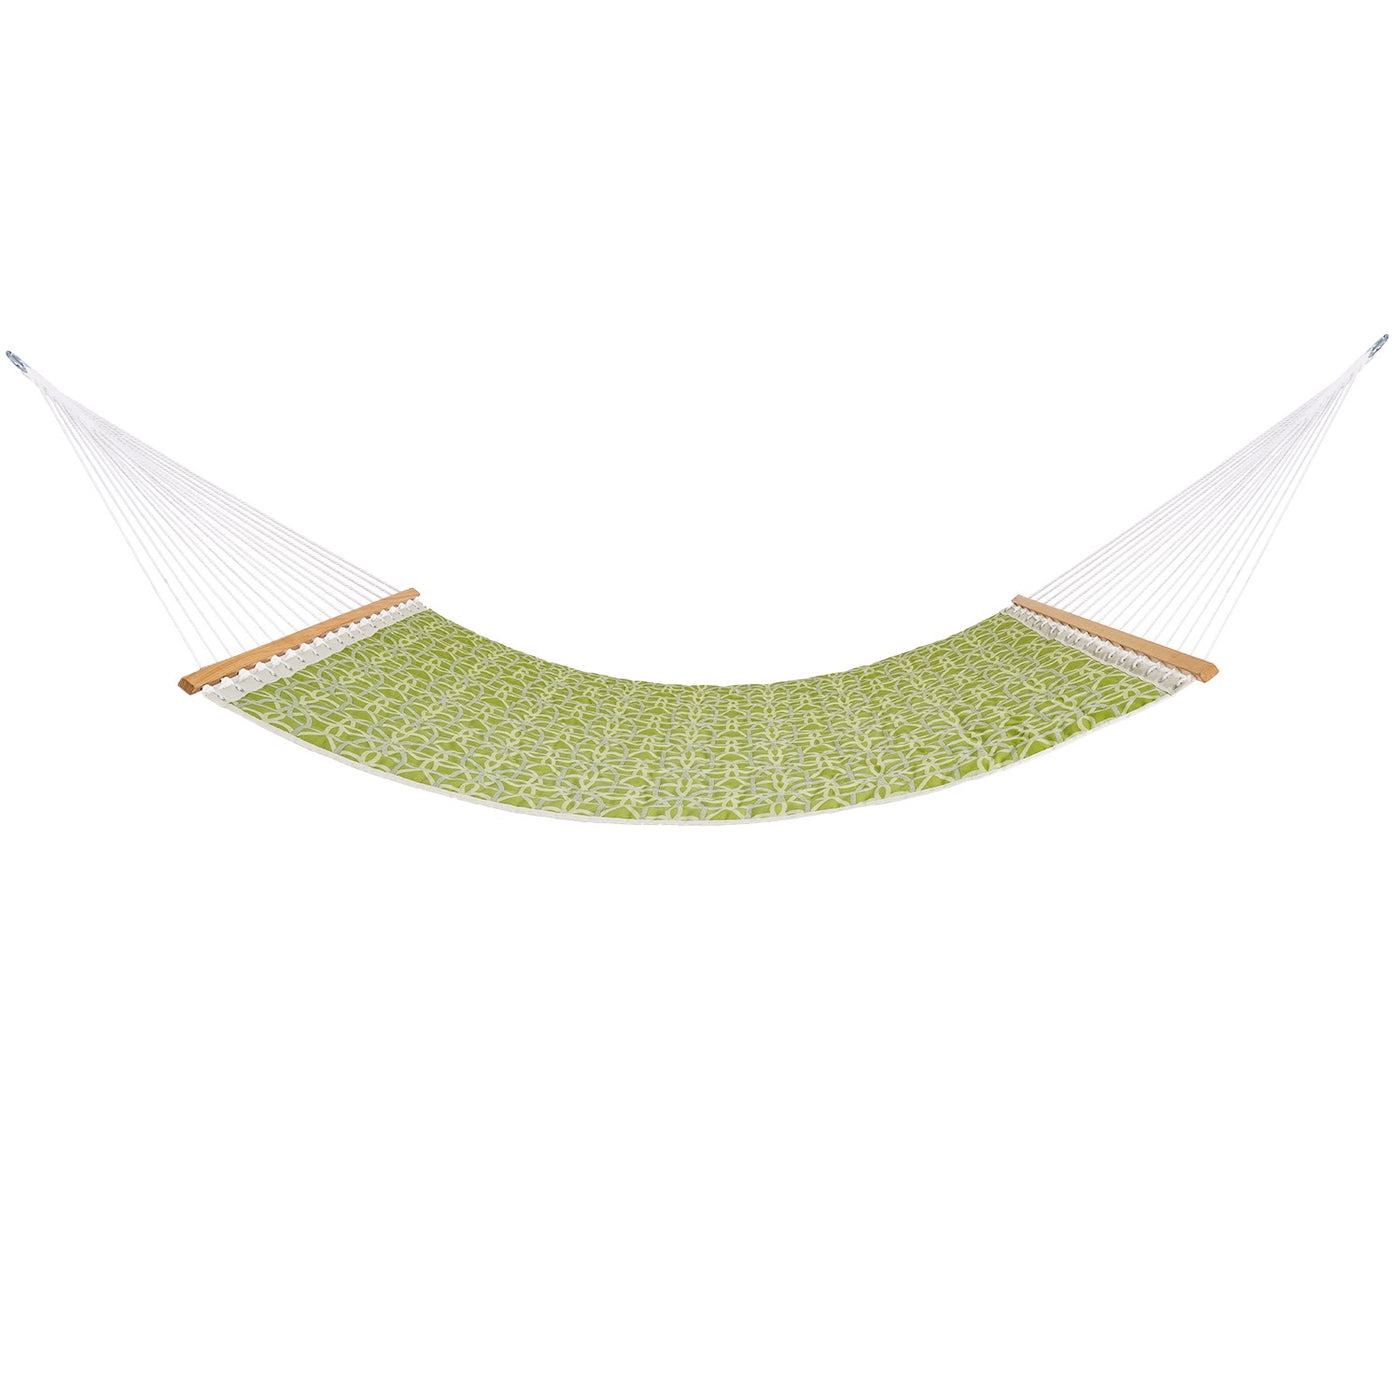 Richloom Double Quilted Hammock